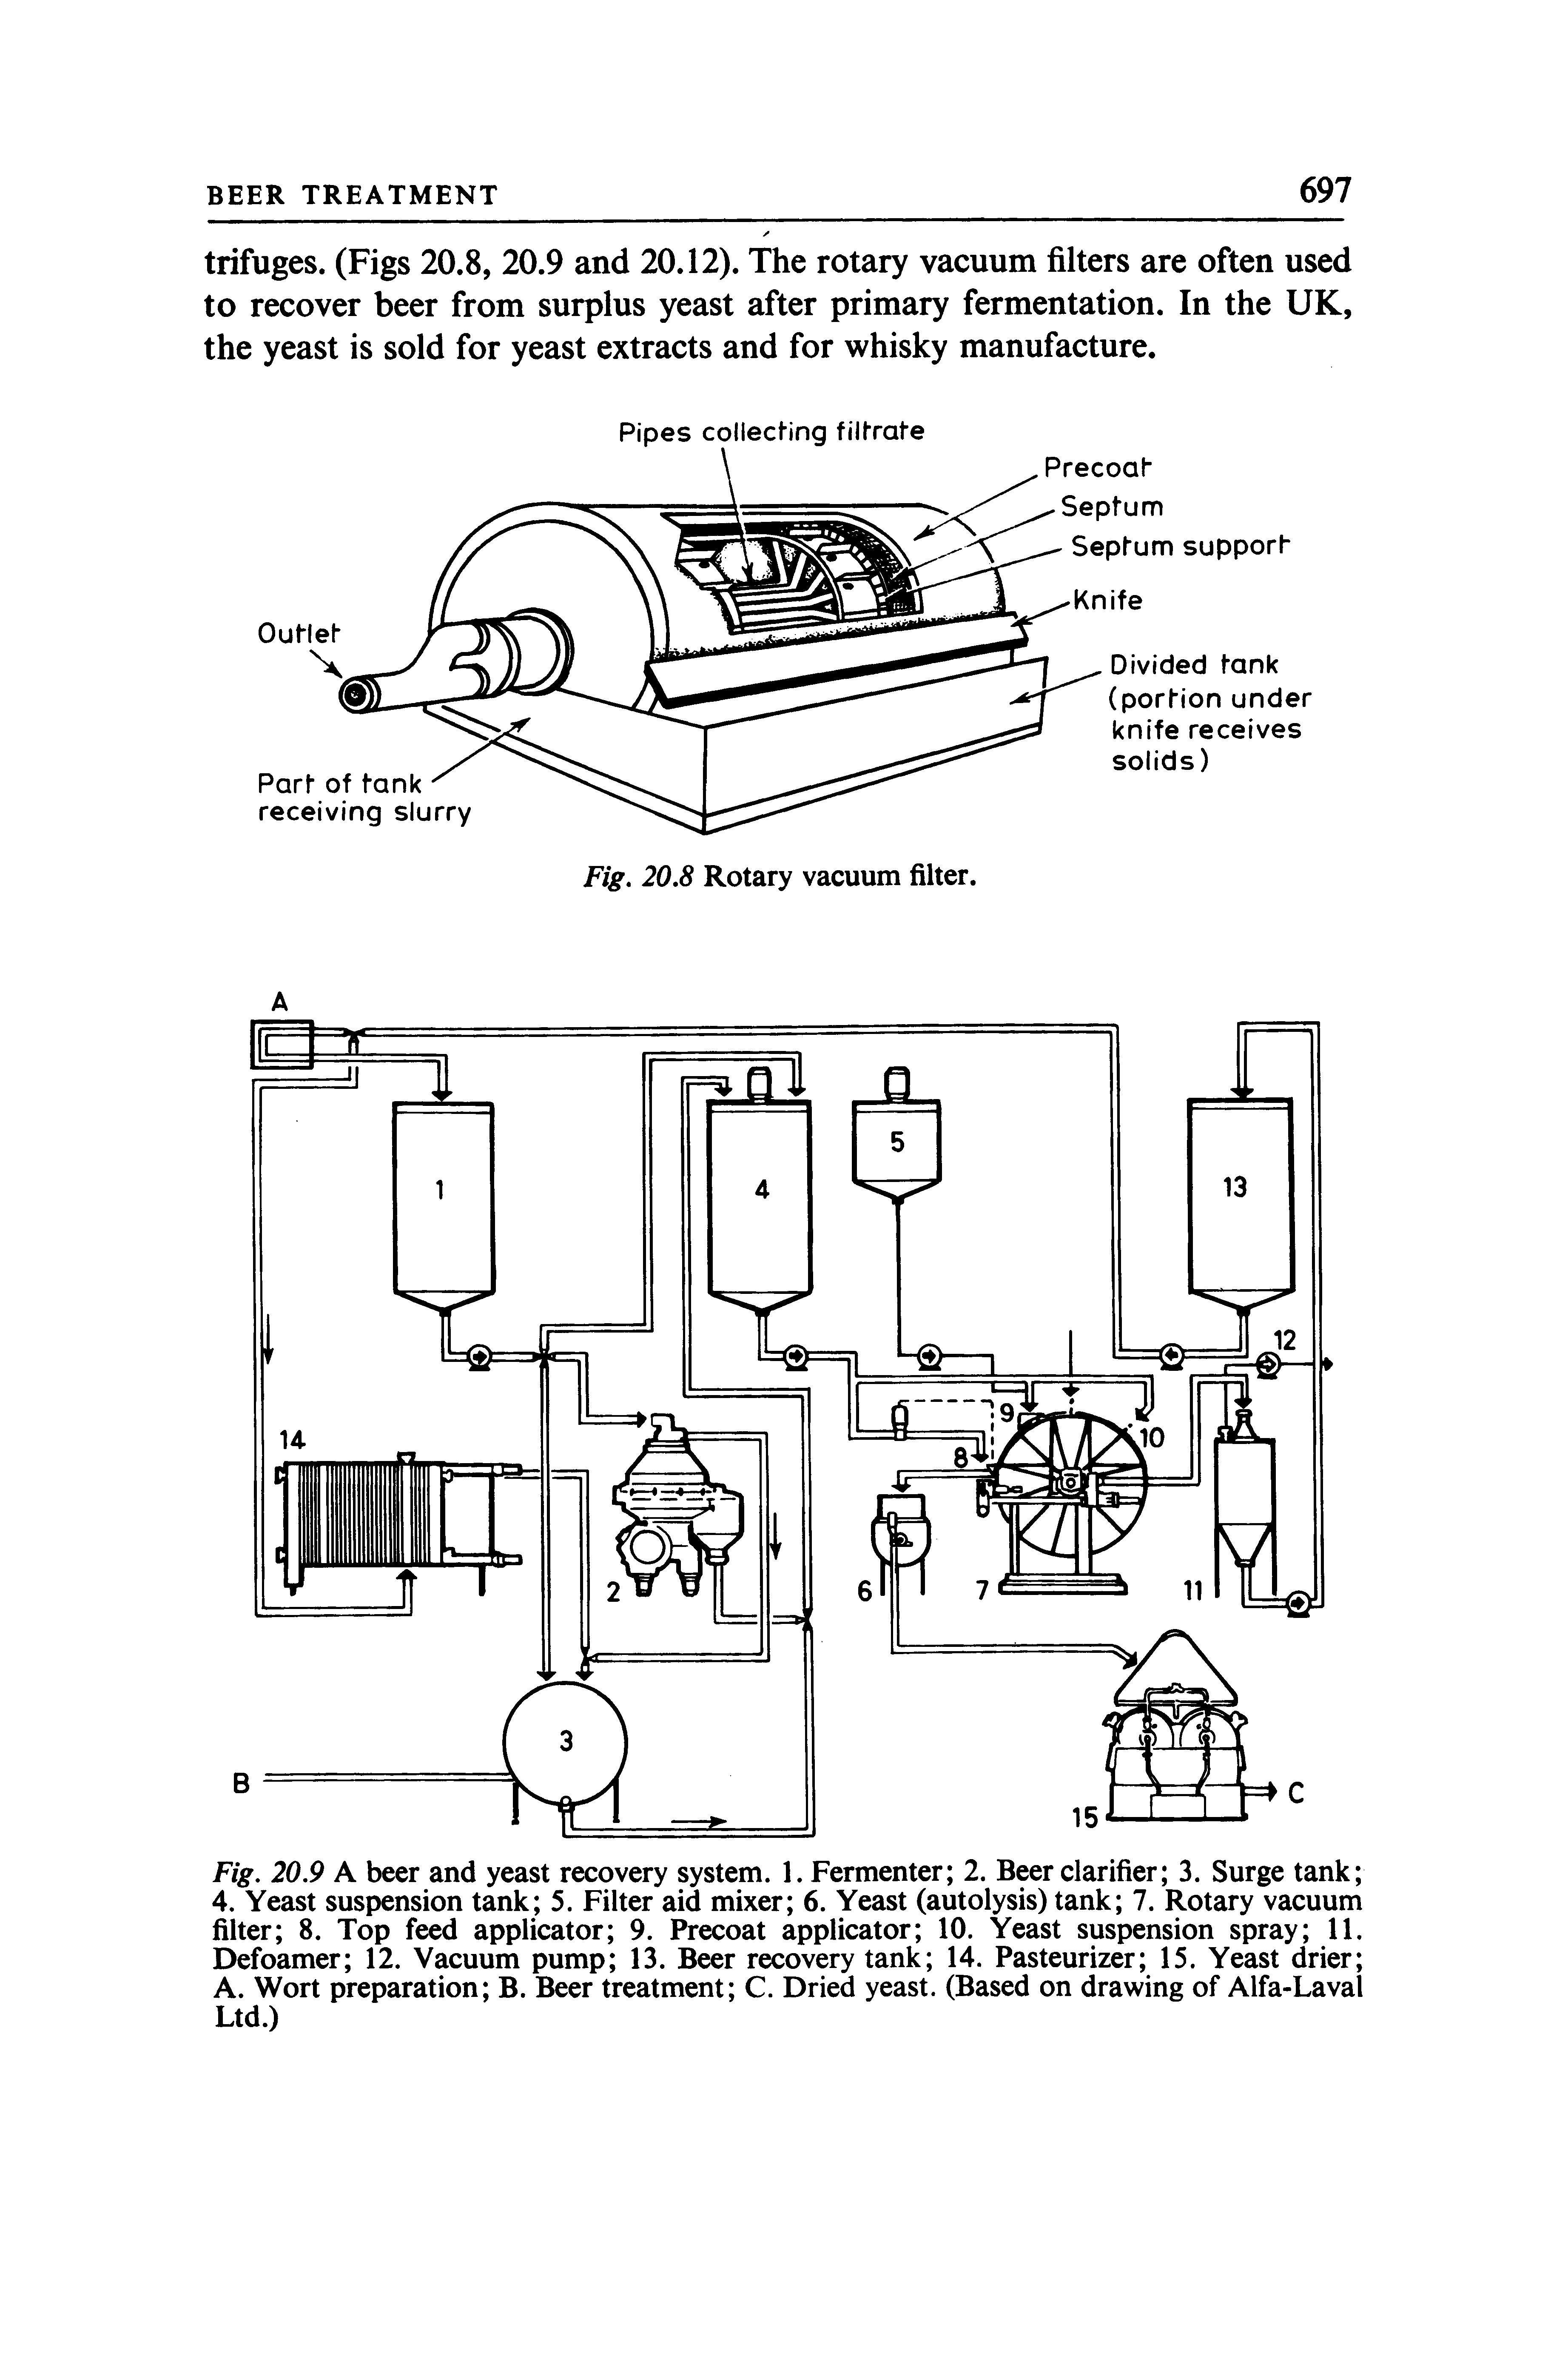 Fig. 20.9 A beer and yeast recovery system. 1. Fermenter 2. Beer clarifier 3. Surge tank 4. Yeast suspension tank 5. Filter aid mixer 6. Yeast (autolysis) tank 7. Rotary vacuum filter 8. Top feed applicator 9. Precoat applicator 10. Yeast suspension spray 11. Defoamer 12. Vacuum pump 13. Beer recovery tank 14. Pasteurizer 15. Yeast drier A. Wort preparation B. Beer treatment C. Dried yeast. (Based on drawing of Alfa-Laval Ltd.)...